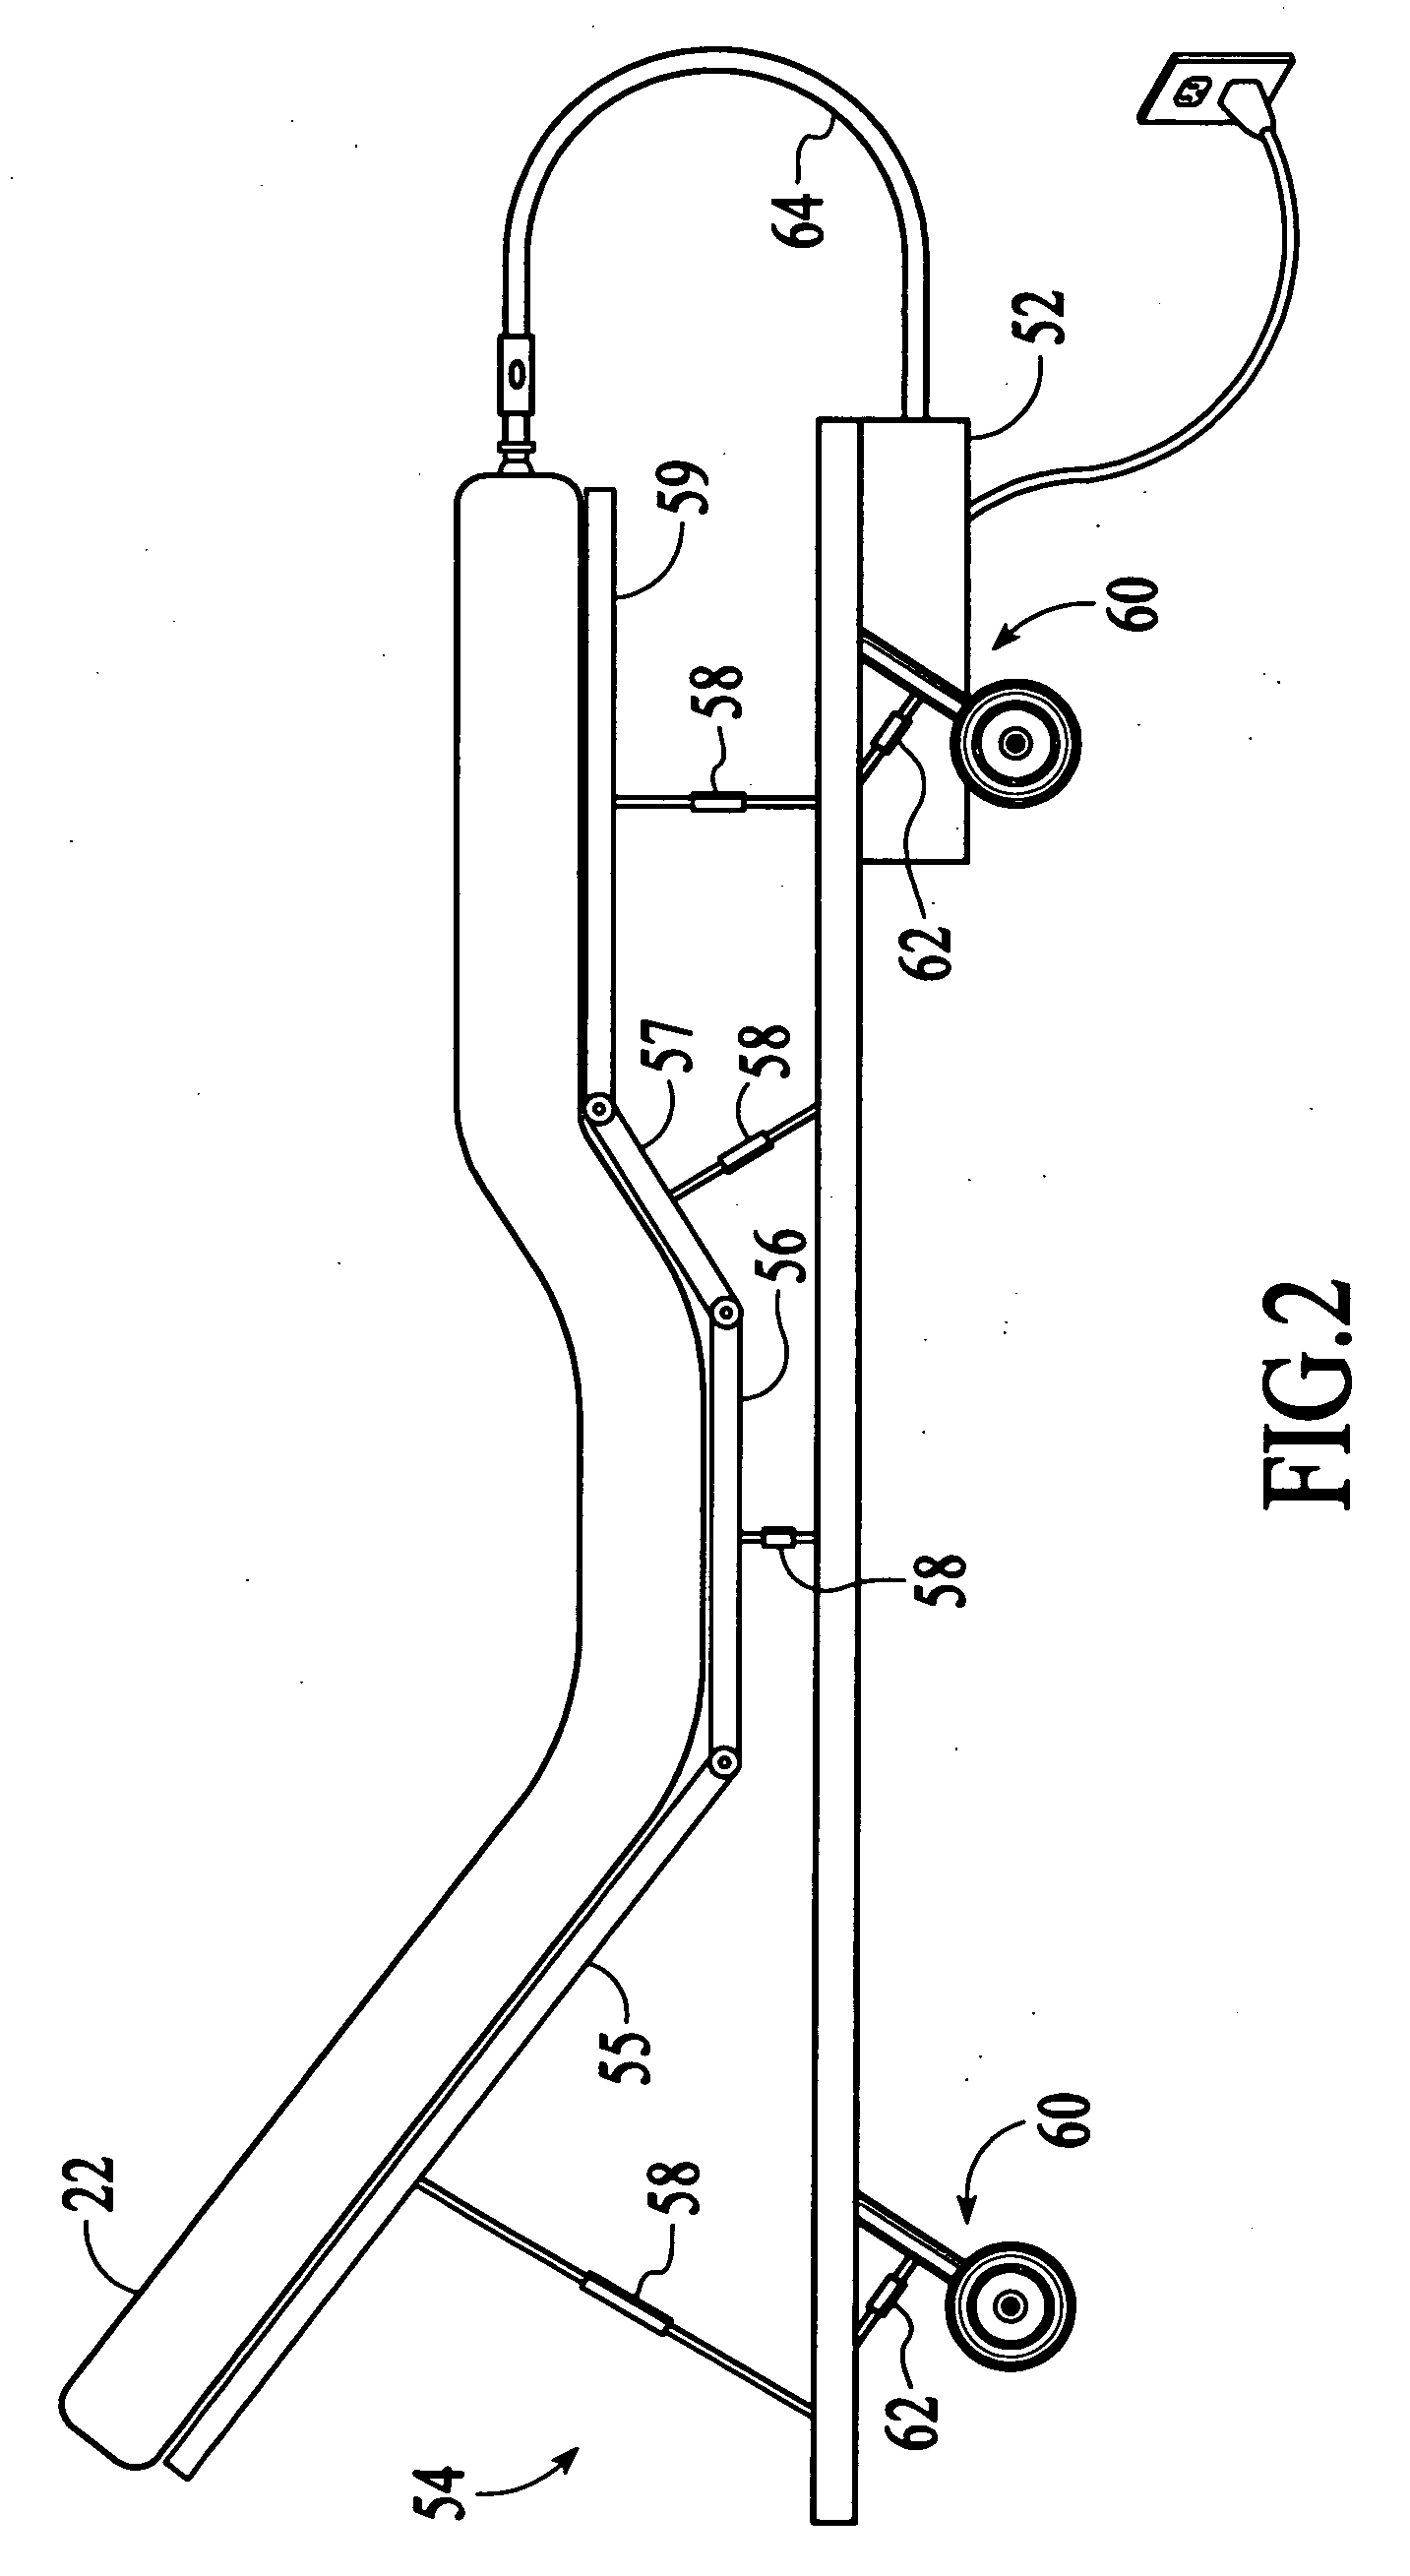 Method and apparatus for transferring patients